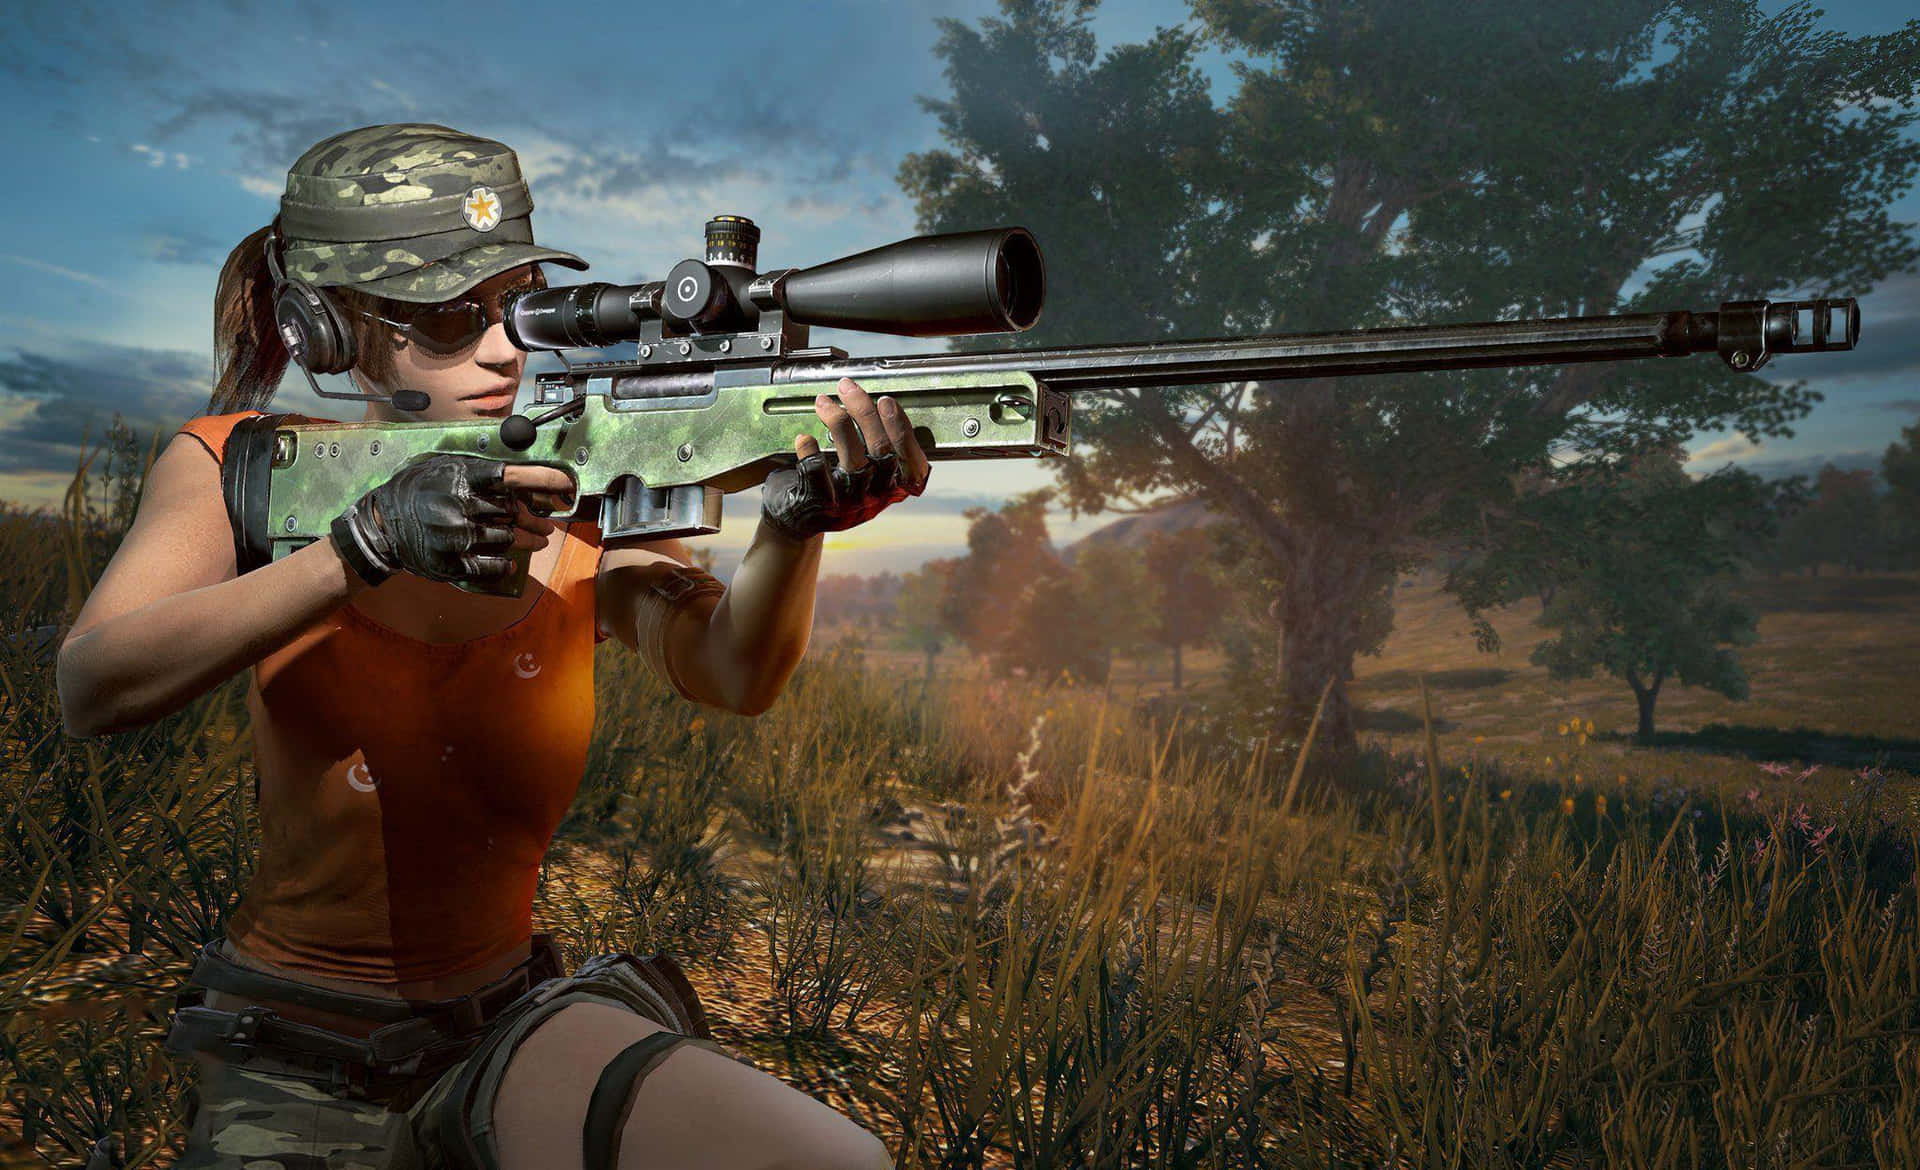 Female_ Sniper_ With_ Rifle_ Outdoors.jpg Wallpaper